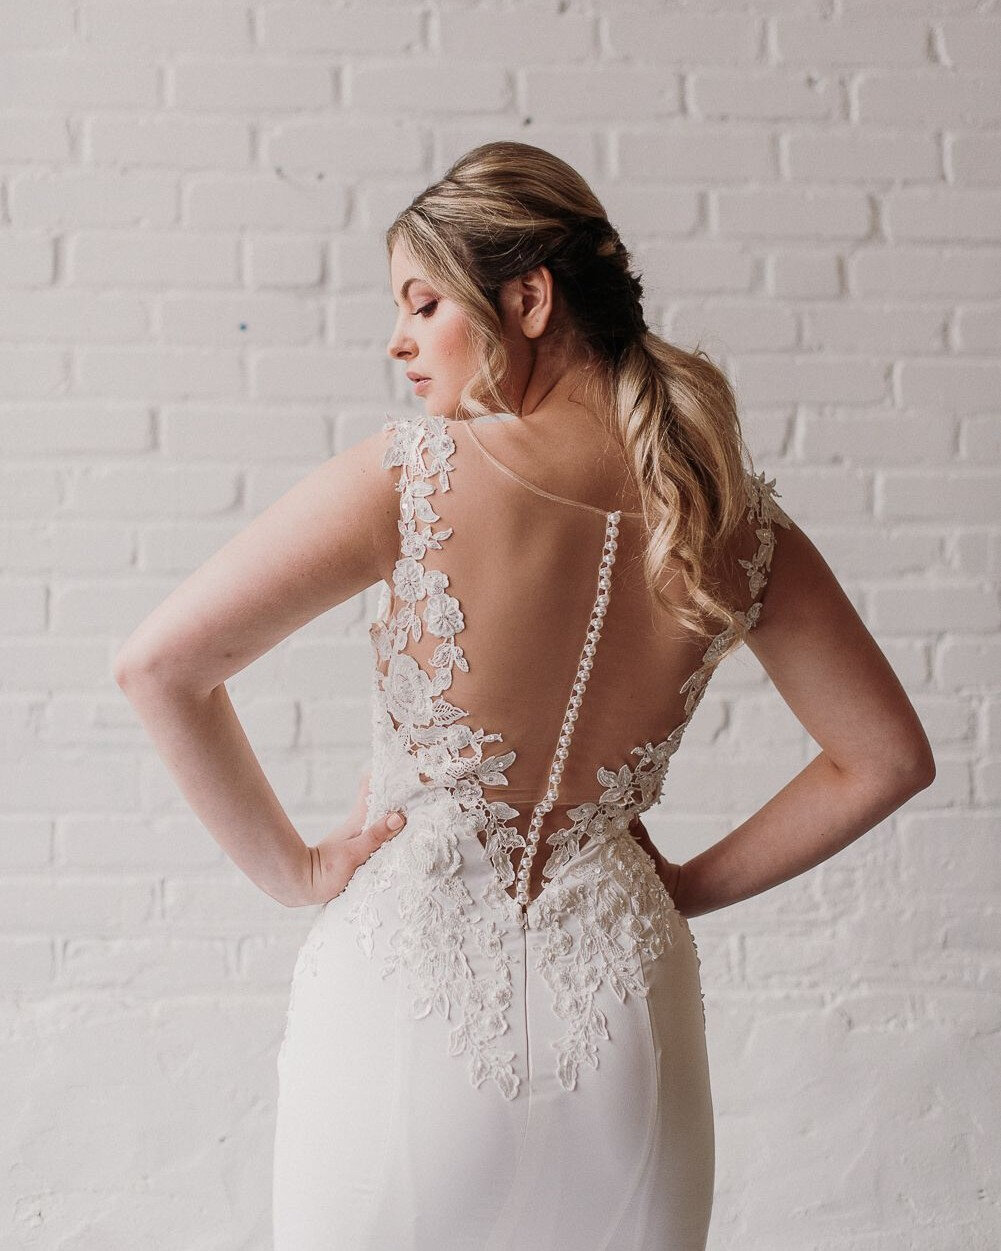 Let&rsquo;s hear some commotion for the back of the dress! This sheath-fit gown is relatively simple until you get to the bodice. Covered in sequined, floral appliques our Tasha gown has an illusion back with button detailing. Made for a spring or su